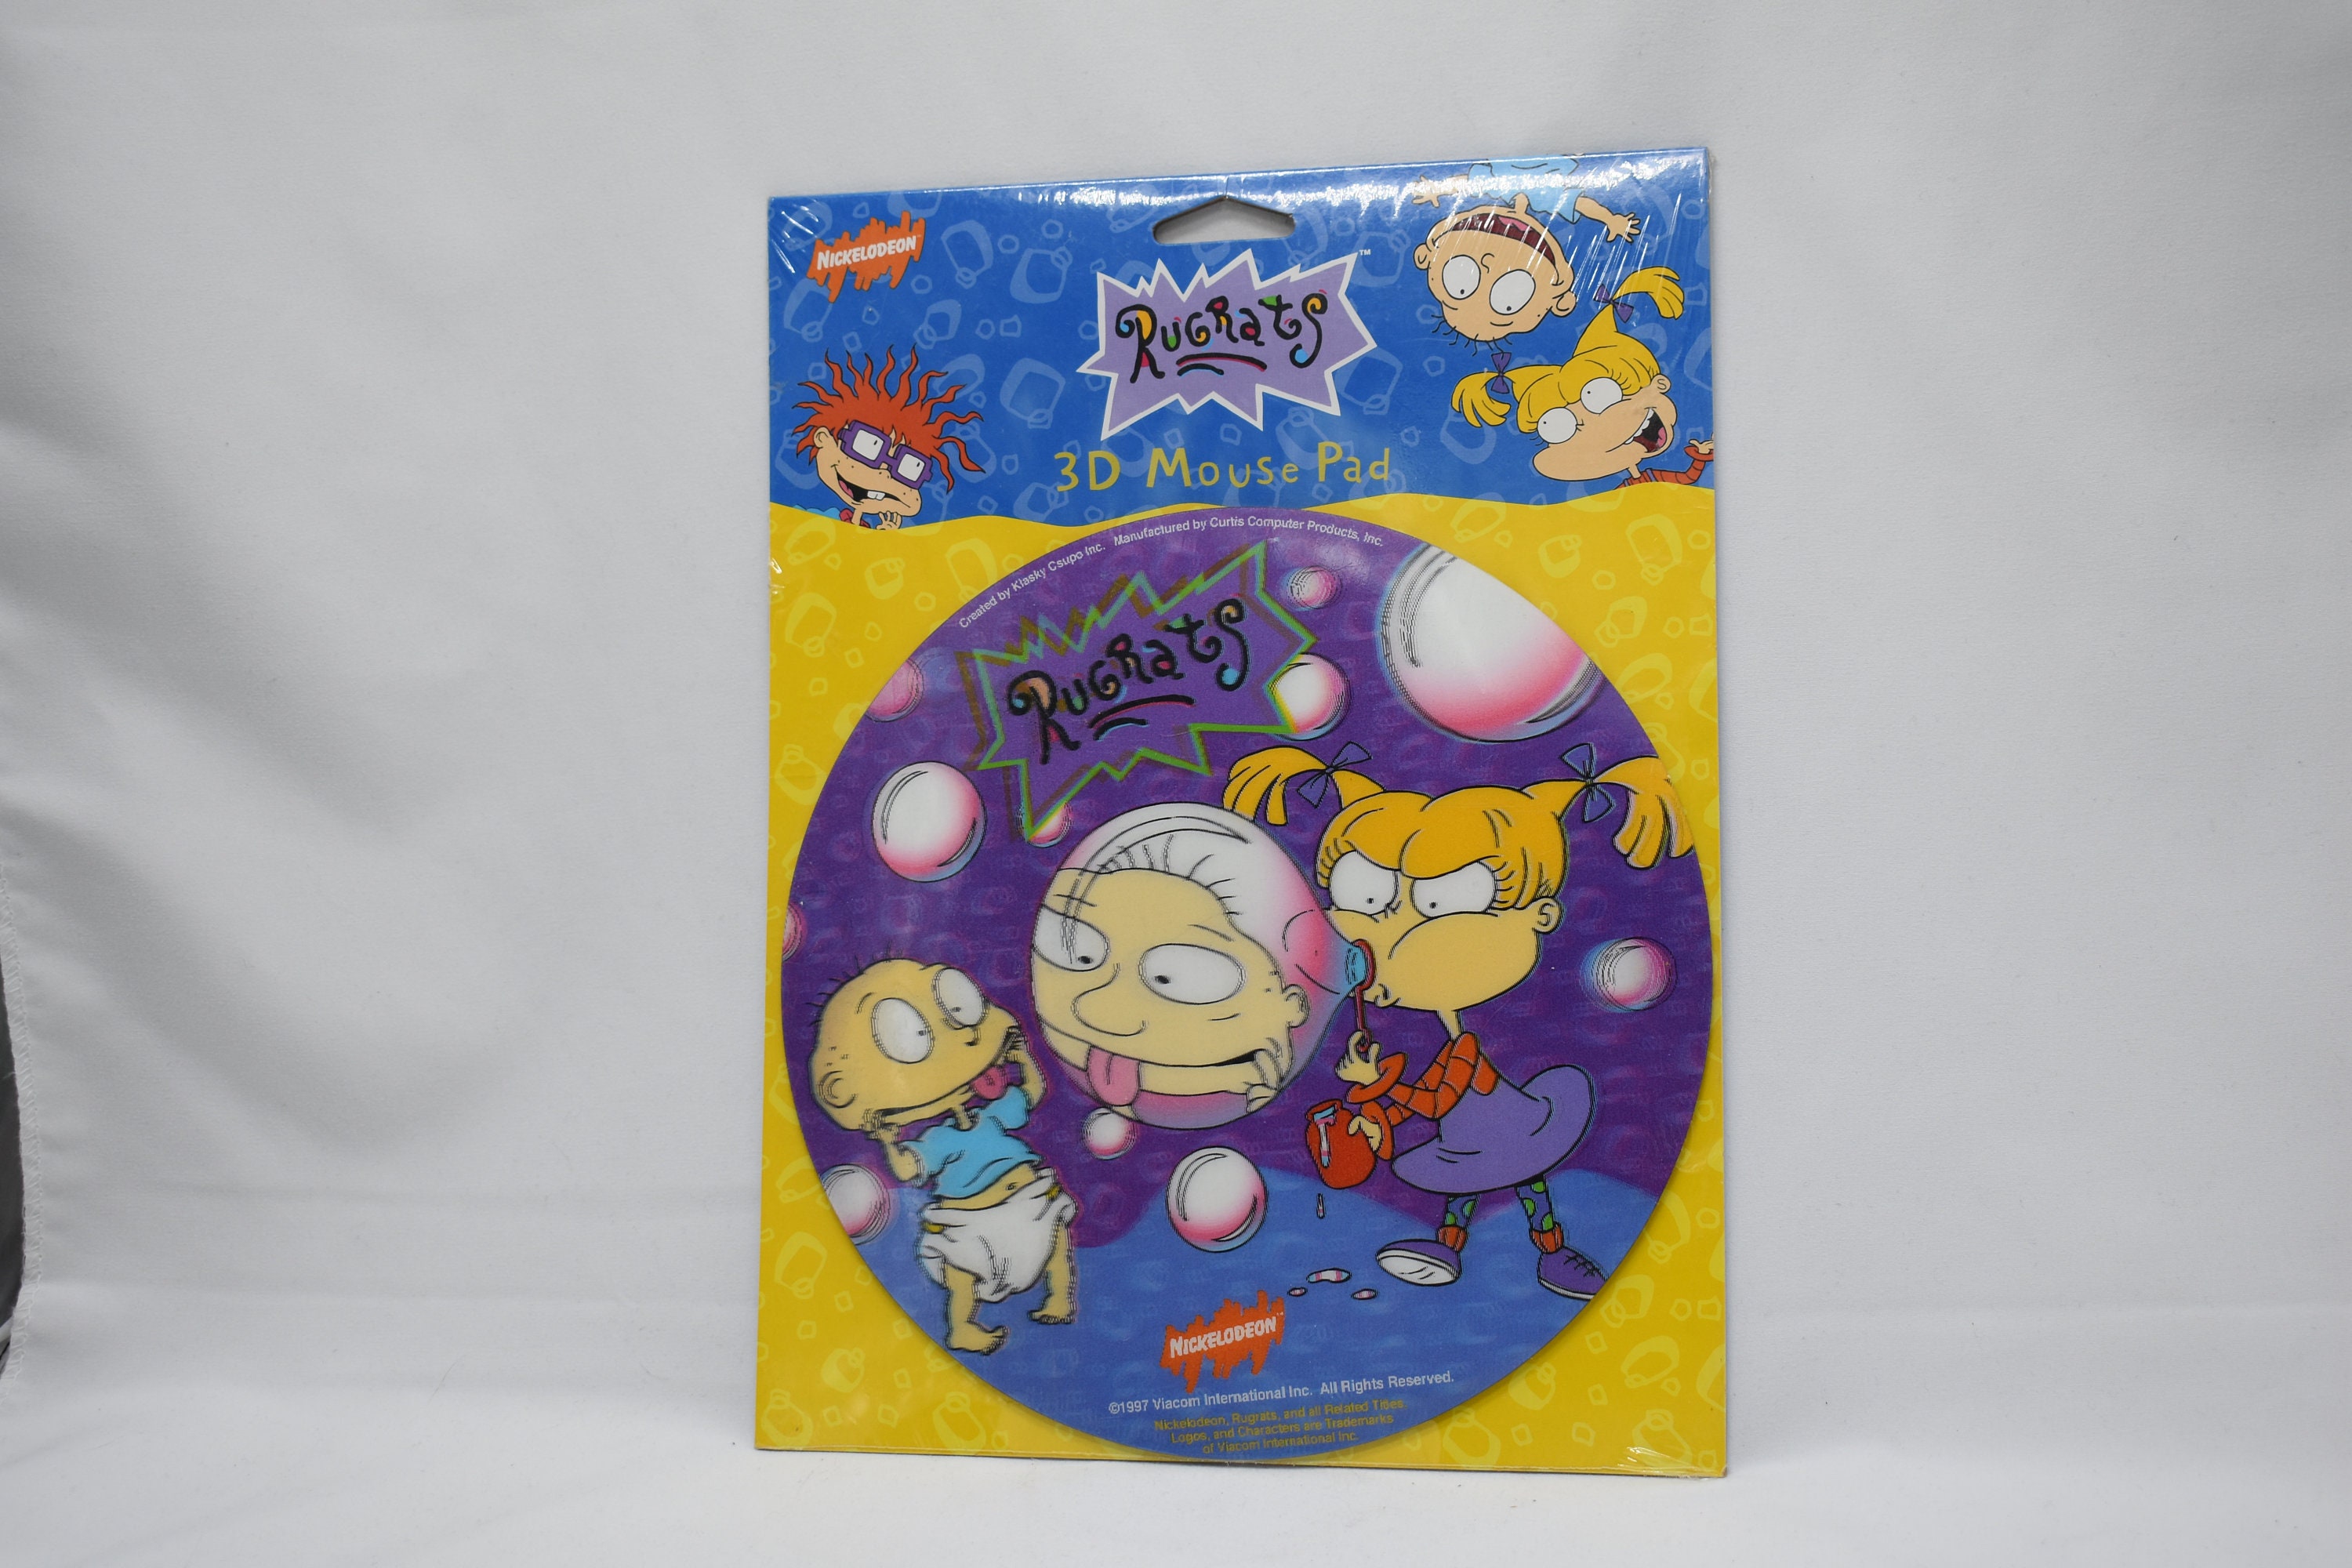 9. Rugrats Blue Hair Dil Doll - wide 6